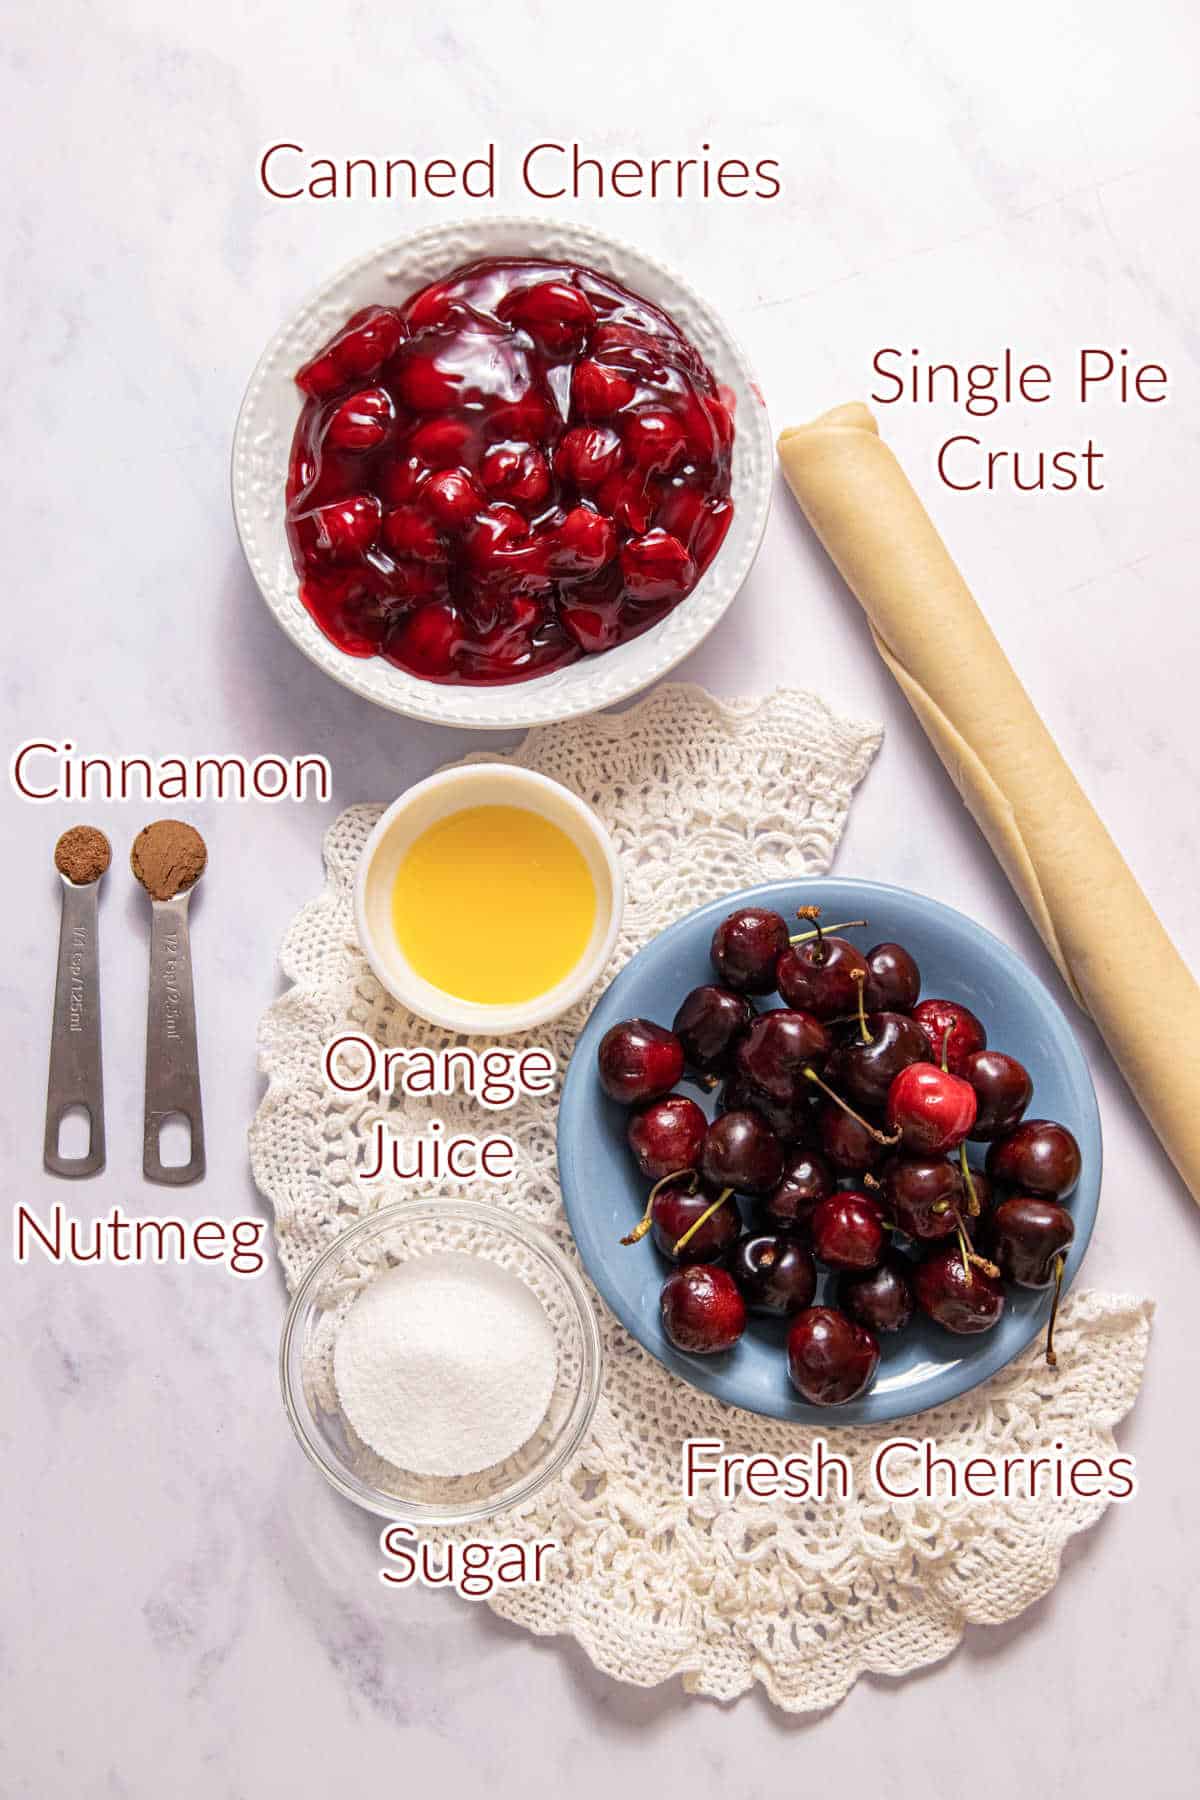 Ingredients for cherry pandowdy preparation laid out on a table, including canned cherries, fresh cherries, sugar, cinnamon, nutmeg, orange juice, and a pie crust.